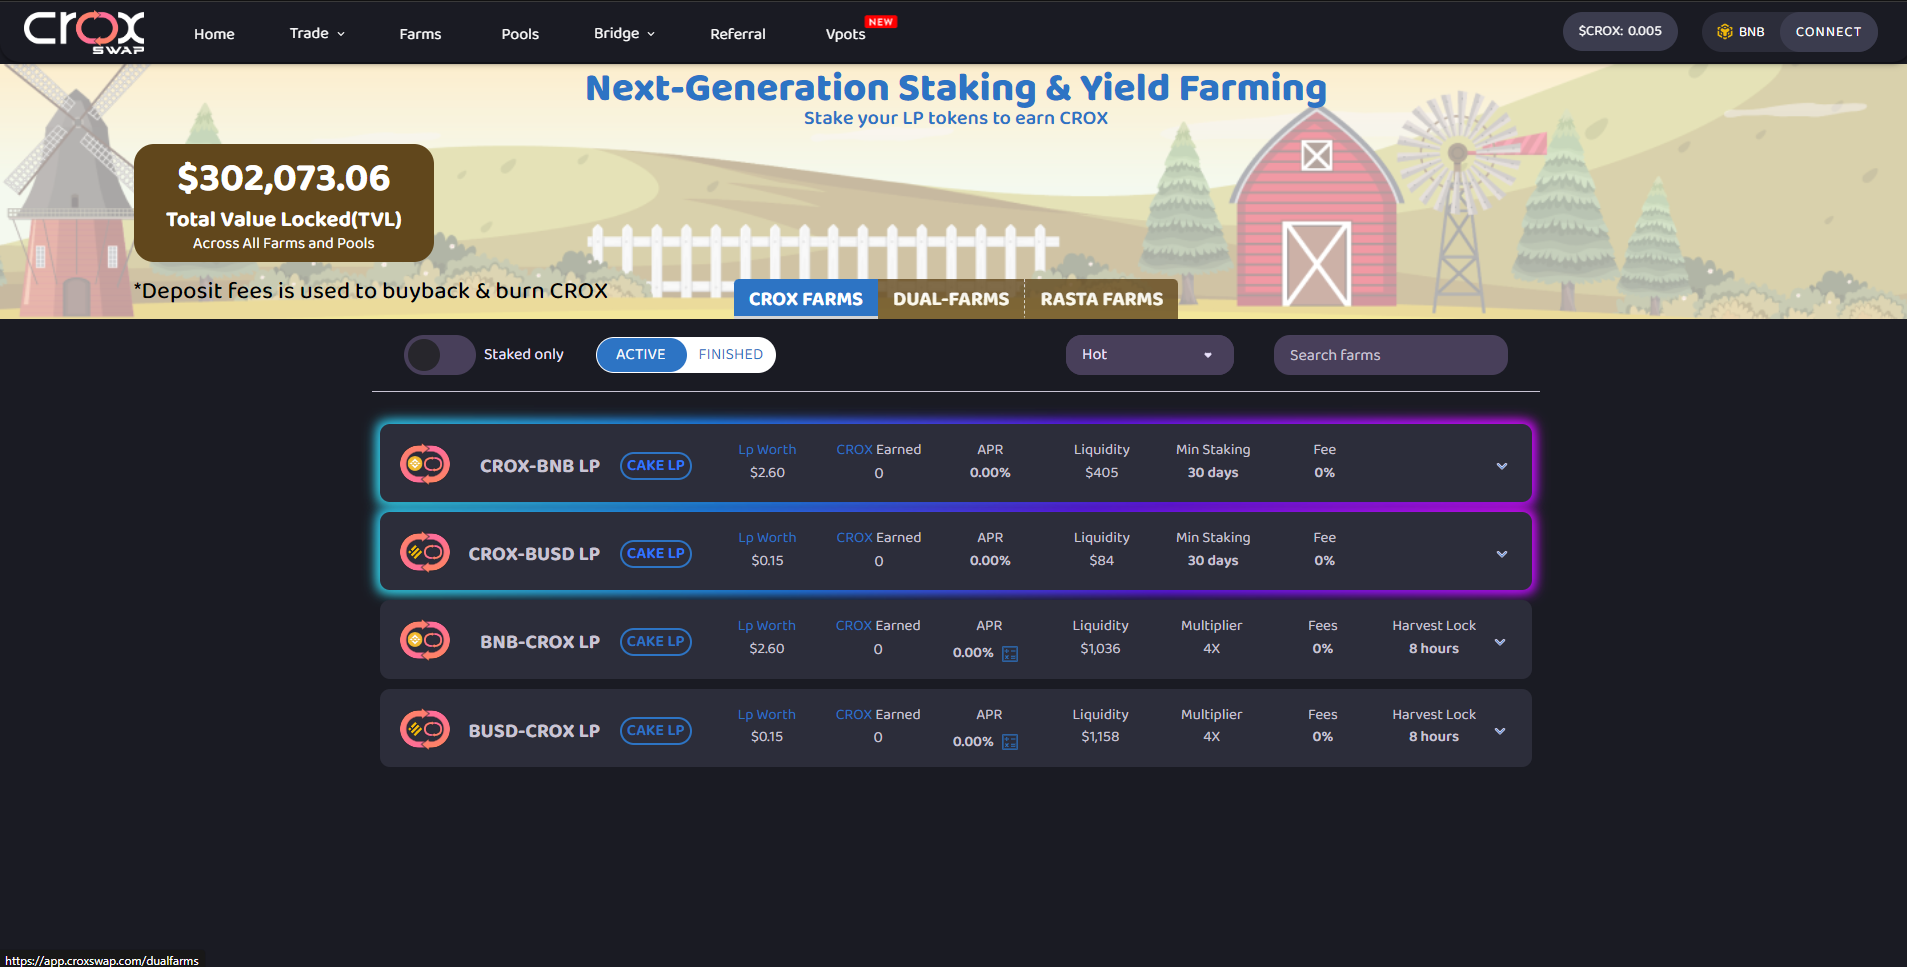 {QE ) A Sr Pry

C7

Next-Generation Staking &amp; Yield Farming

Stake your LP tokens to earn CROX

$302,073.06

Total Value Locked(TVL)
Across All Farms and Pools.

‘Deposit fees is used to buyback &amp; burn CROX

 

 

 

 

  

 

Rh EL Ll) - RTE NFA EY
@ BUSD-CROX LP EP) Py 0.00% Ph 2 8 hours ~

 

[RY PU